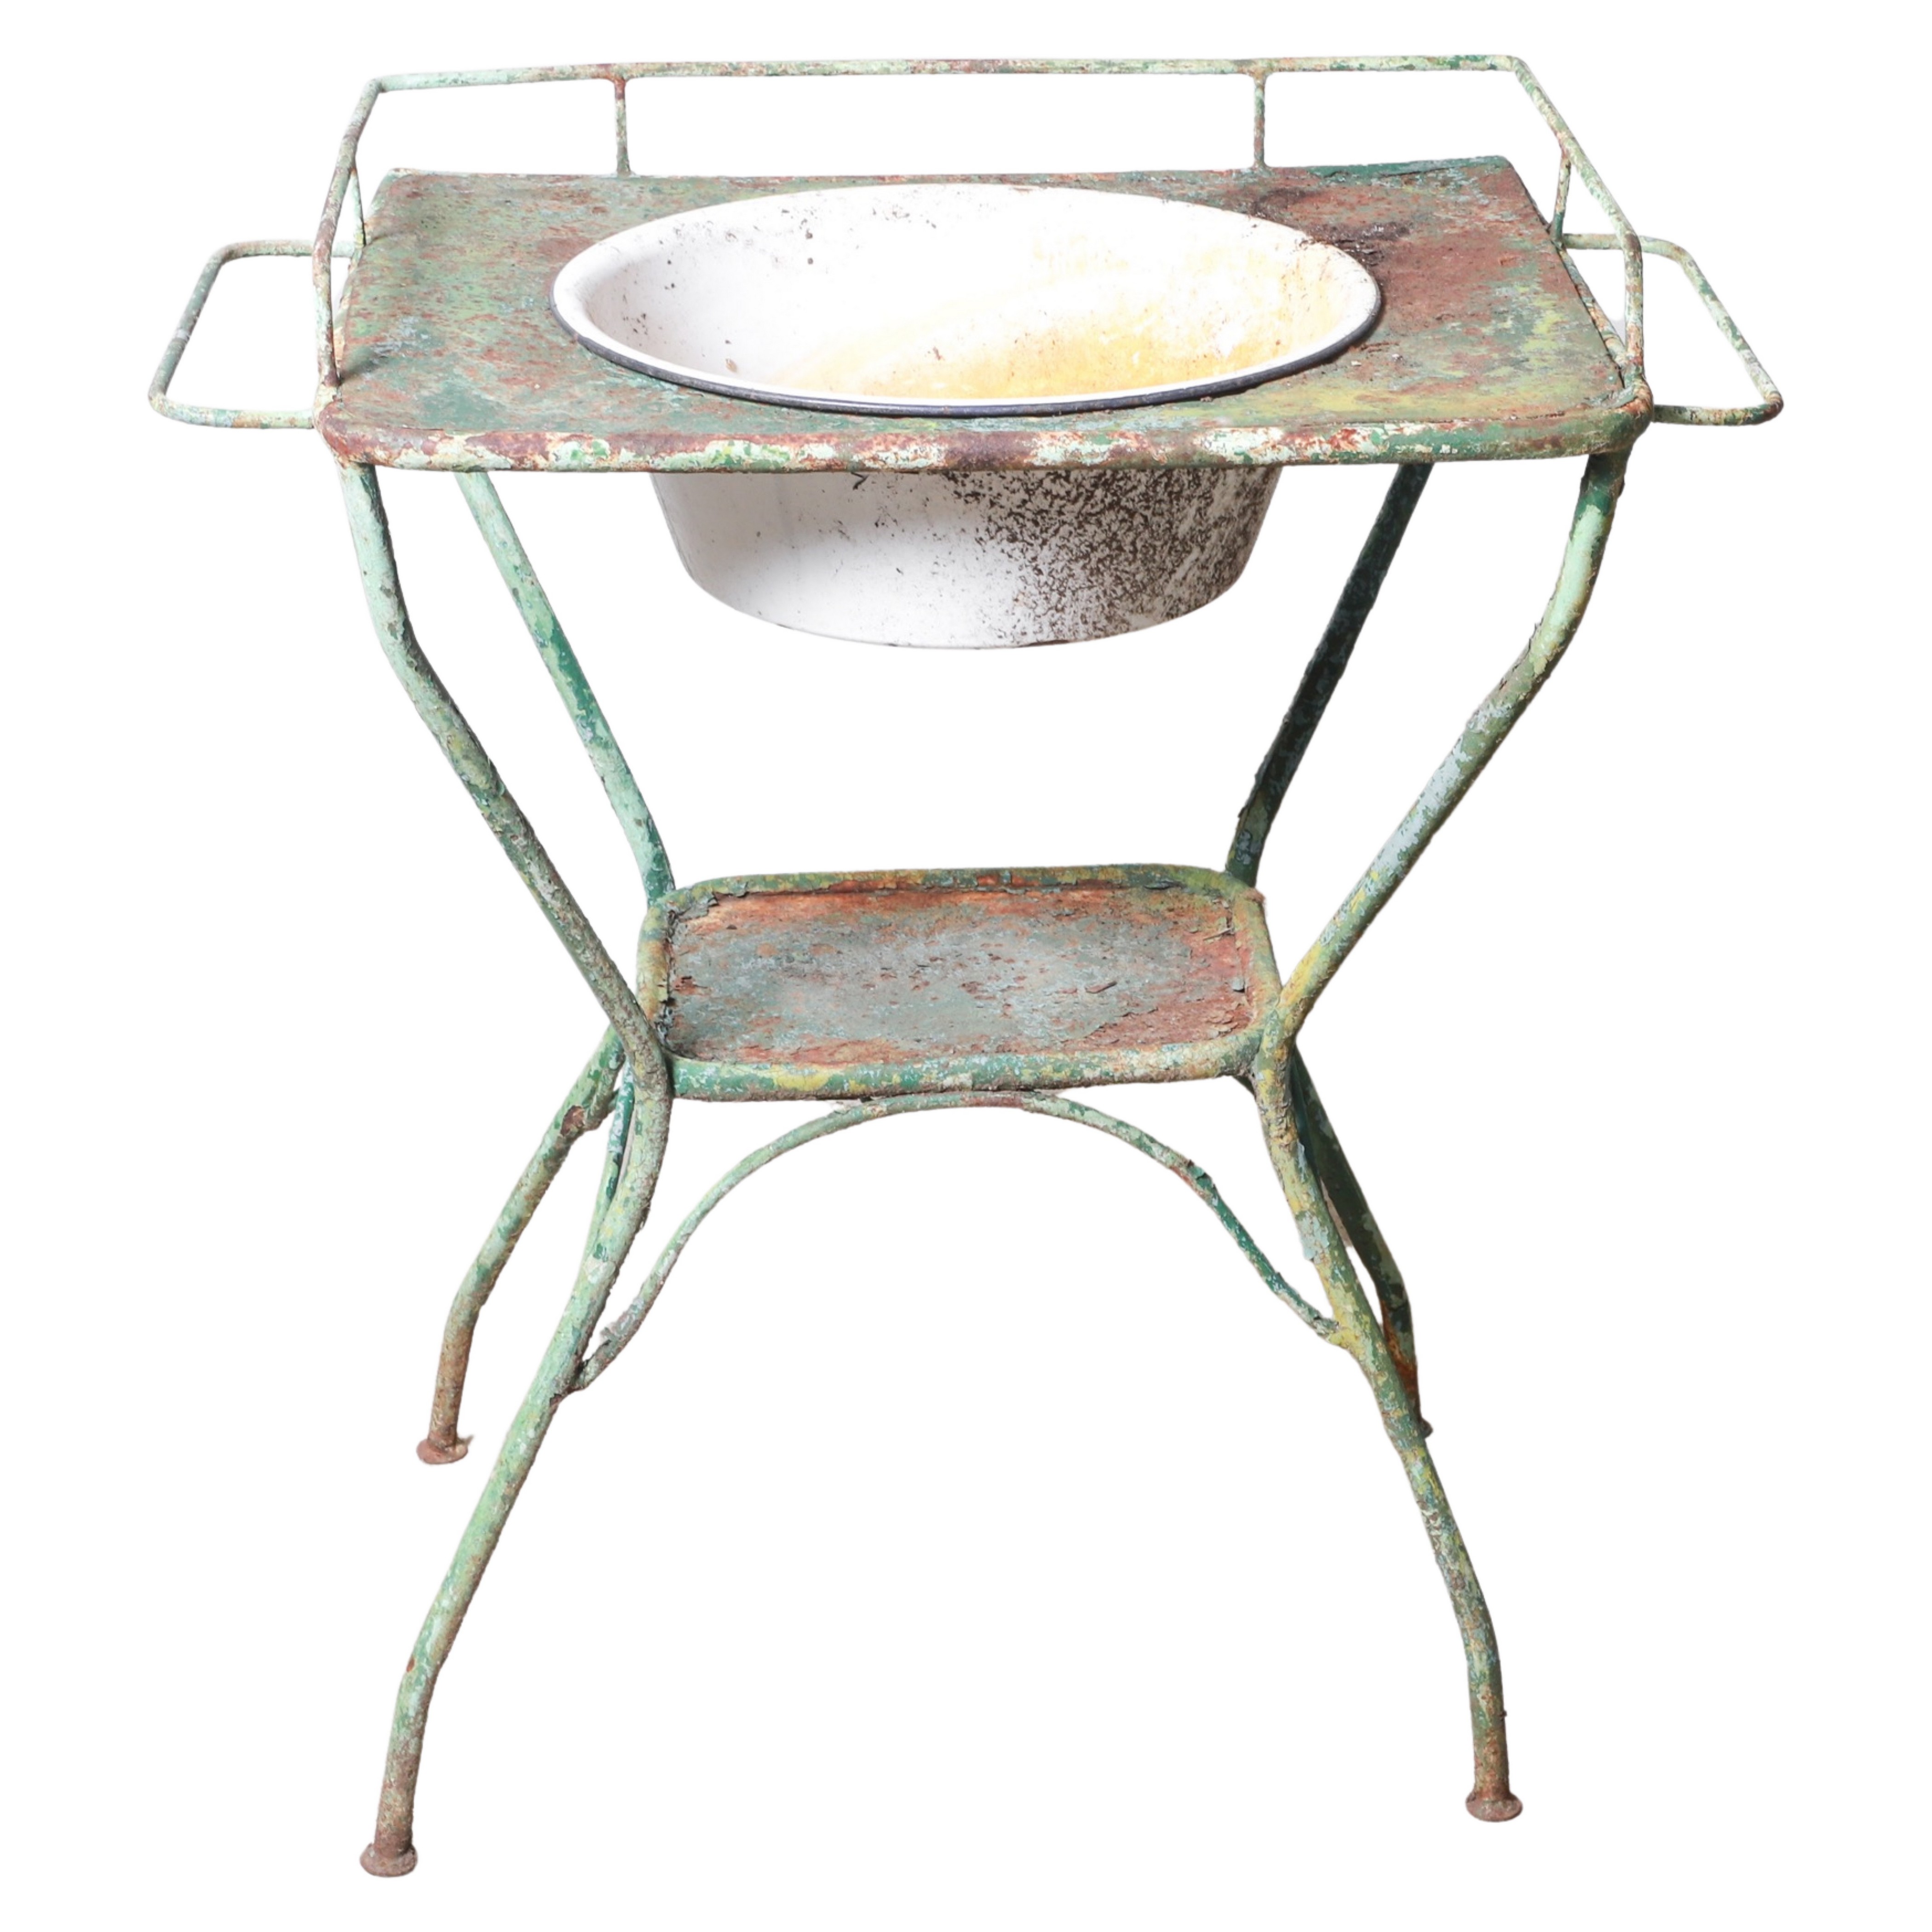 Green painted metal washstand,